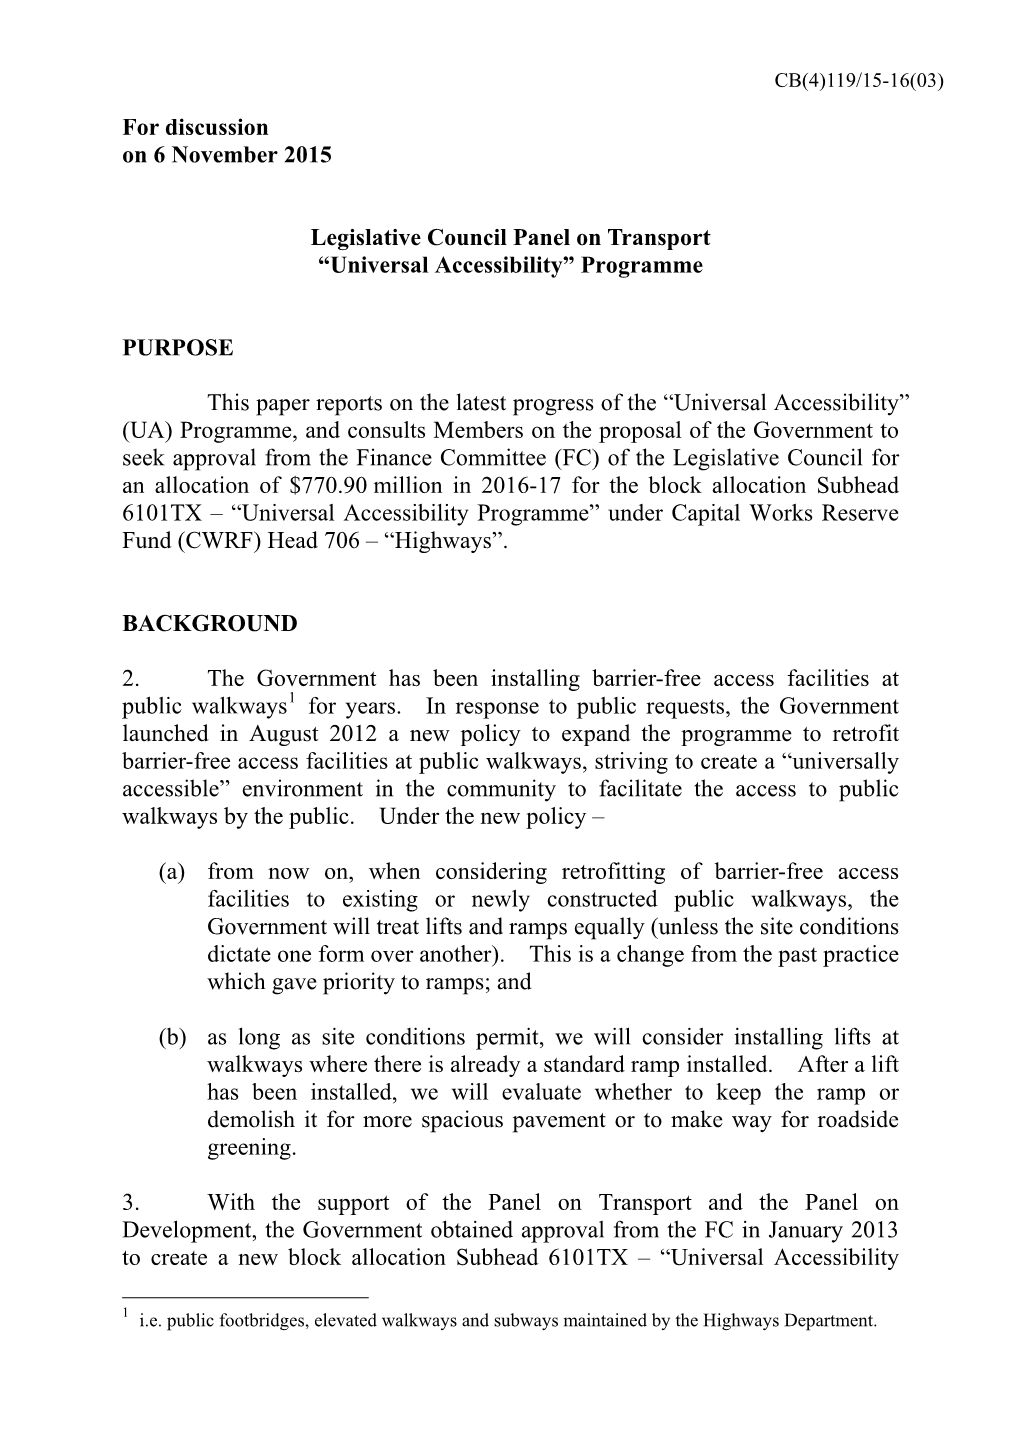 For Discussion on 6 November 2015 Legislative Council Panel On